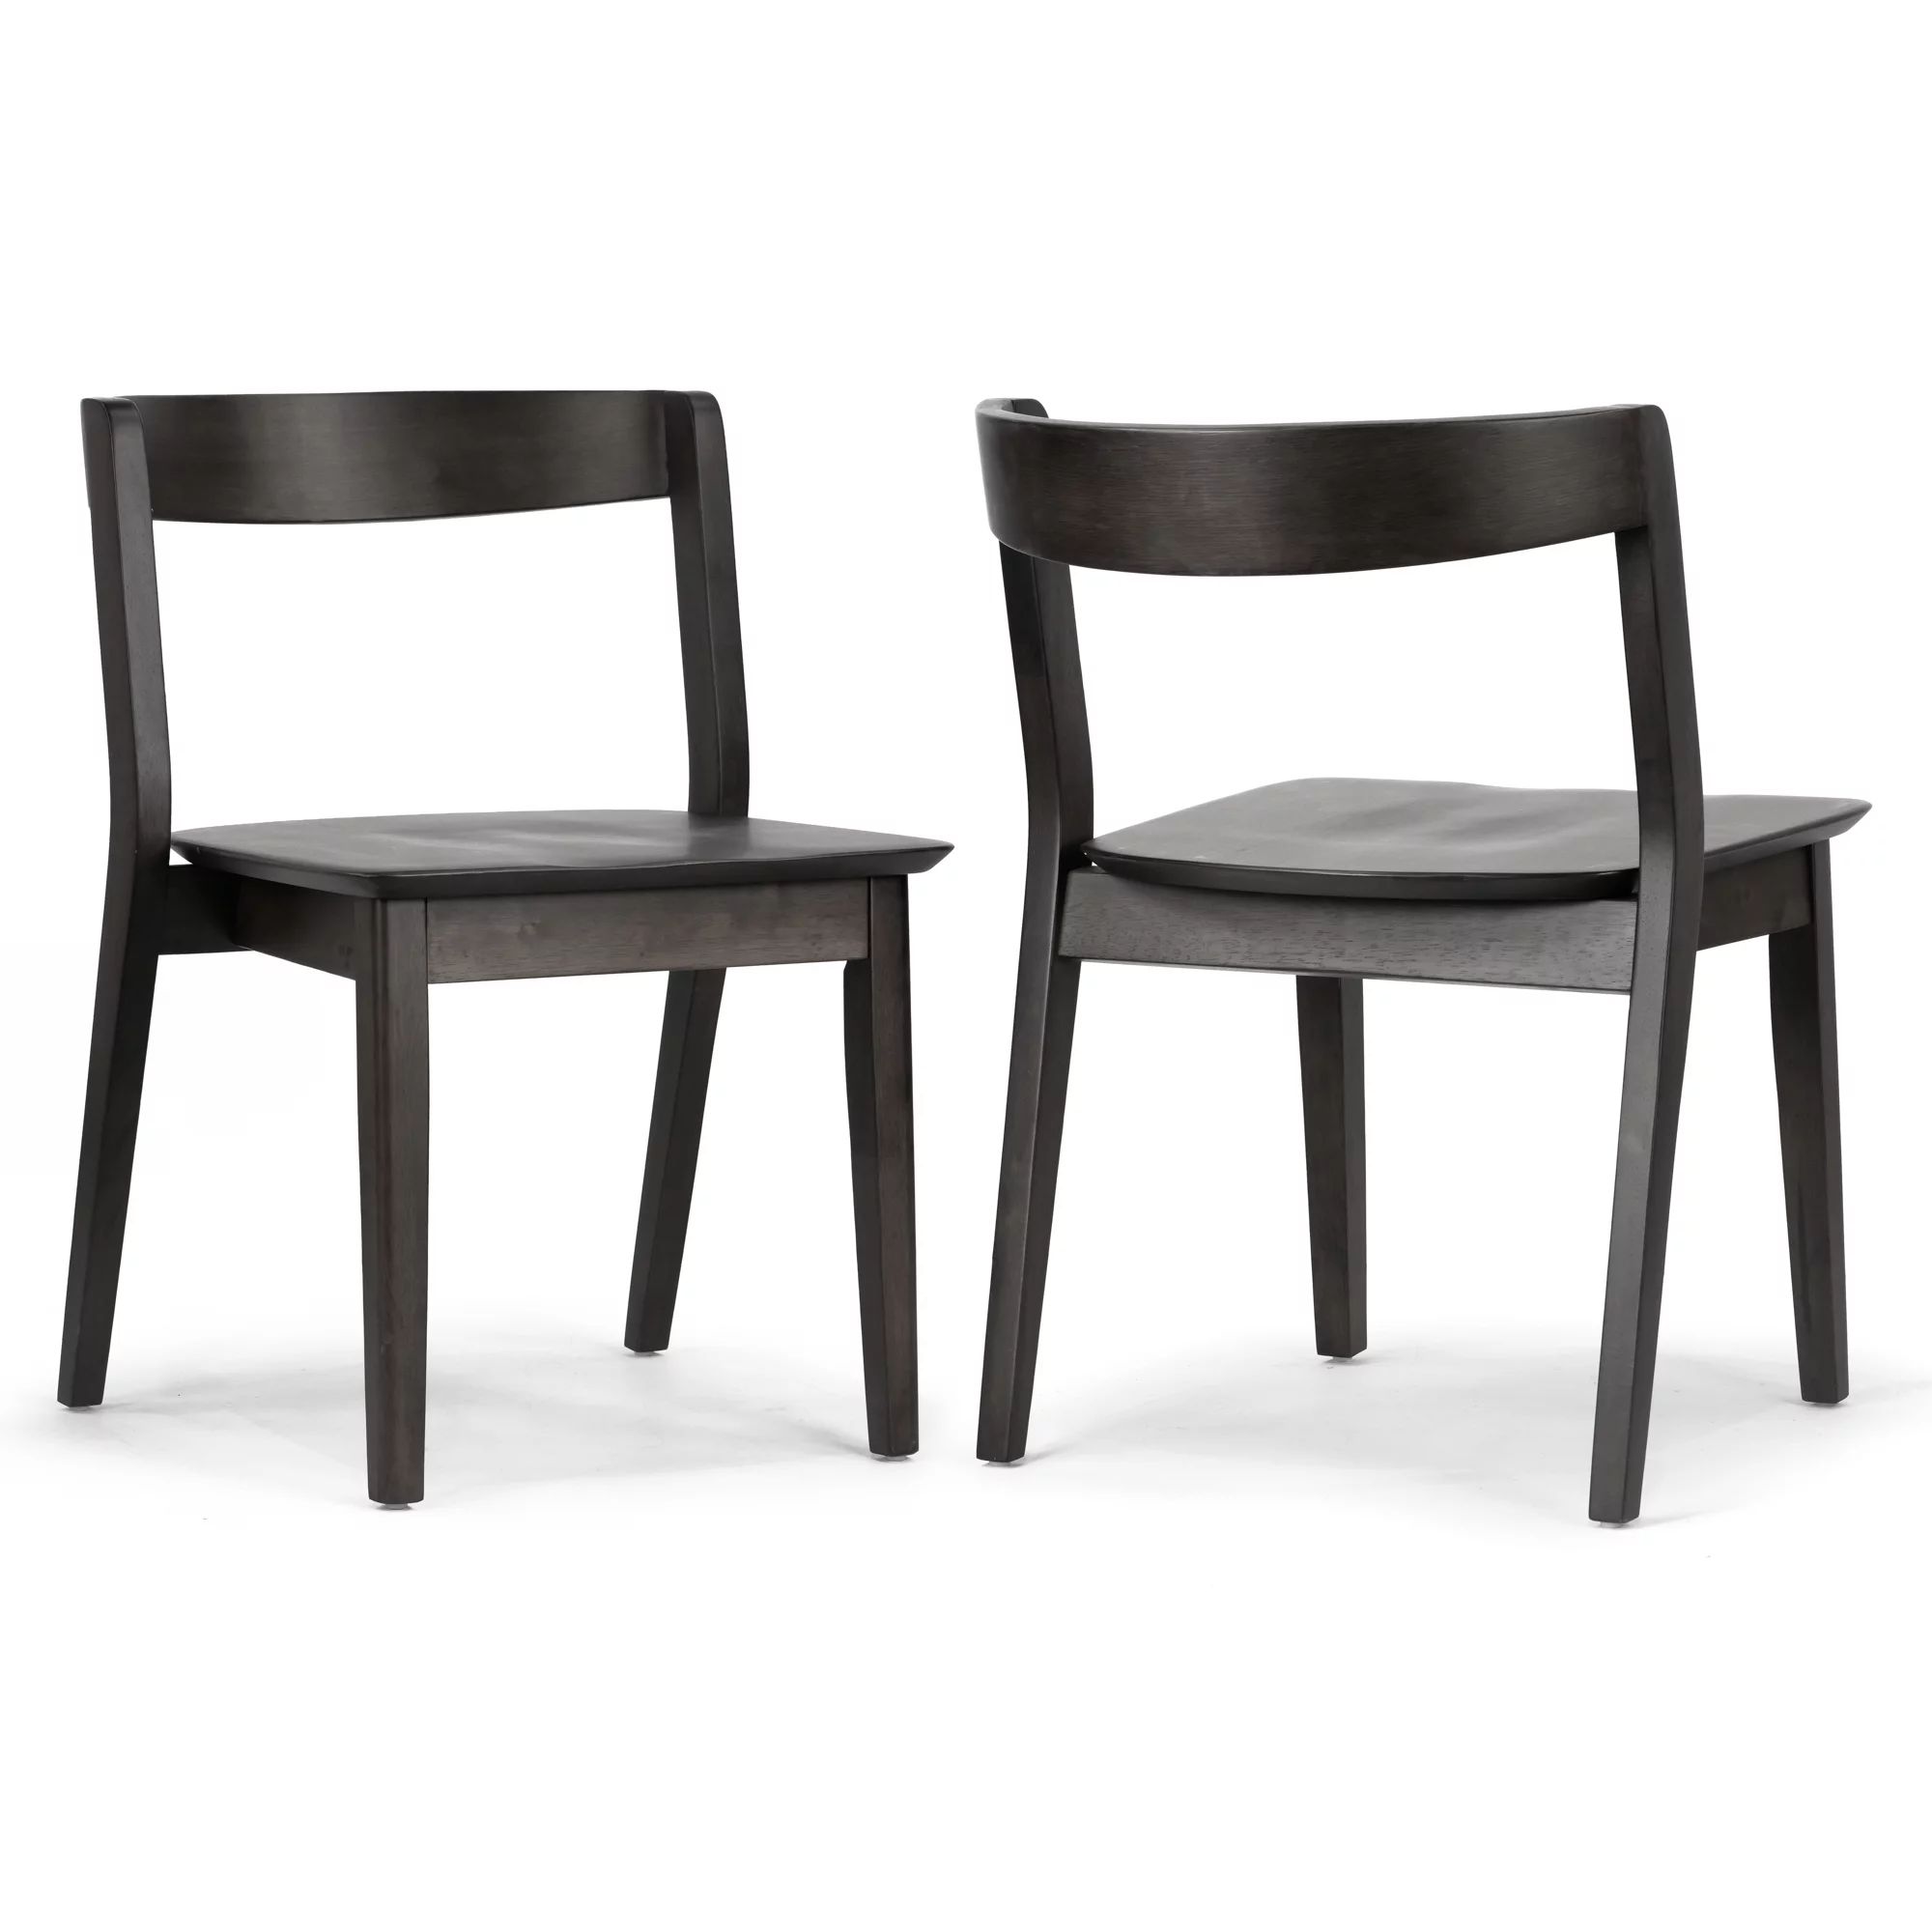 Glamour Home Astor 17.52" Wood Chairs with Curved Back in Black (Set of 2) | Walmart (US)